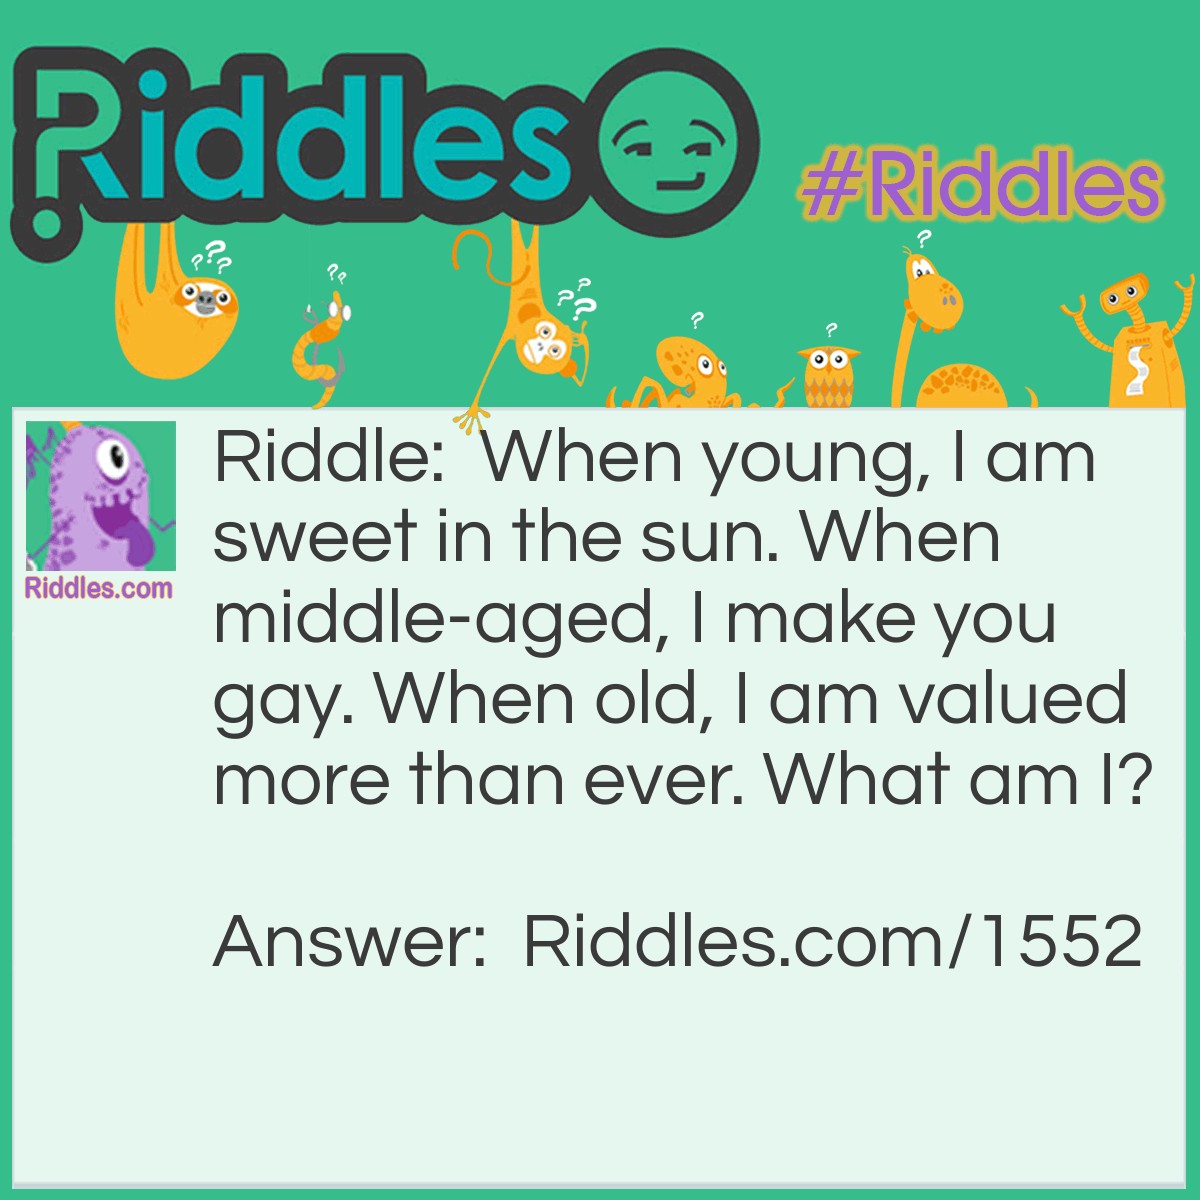 Riddle: When young, I am sweet in the sun. When middle-aged, I make you gay. When old, I am valued more than ever. What am I? Answer: Wine